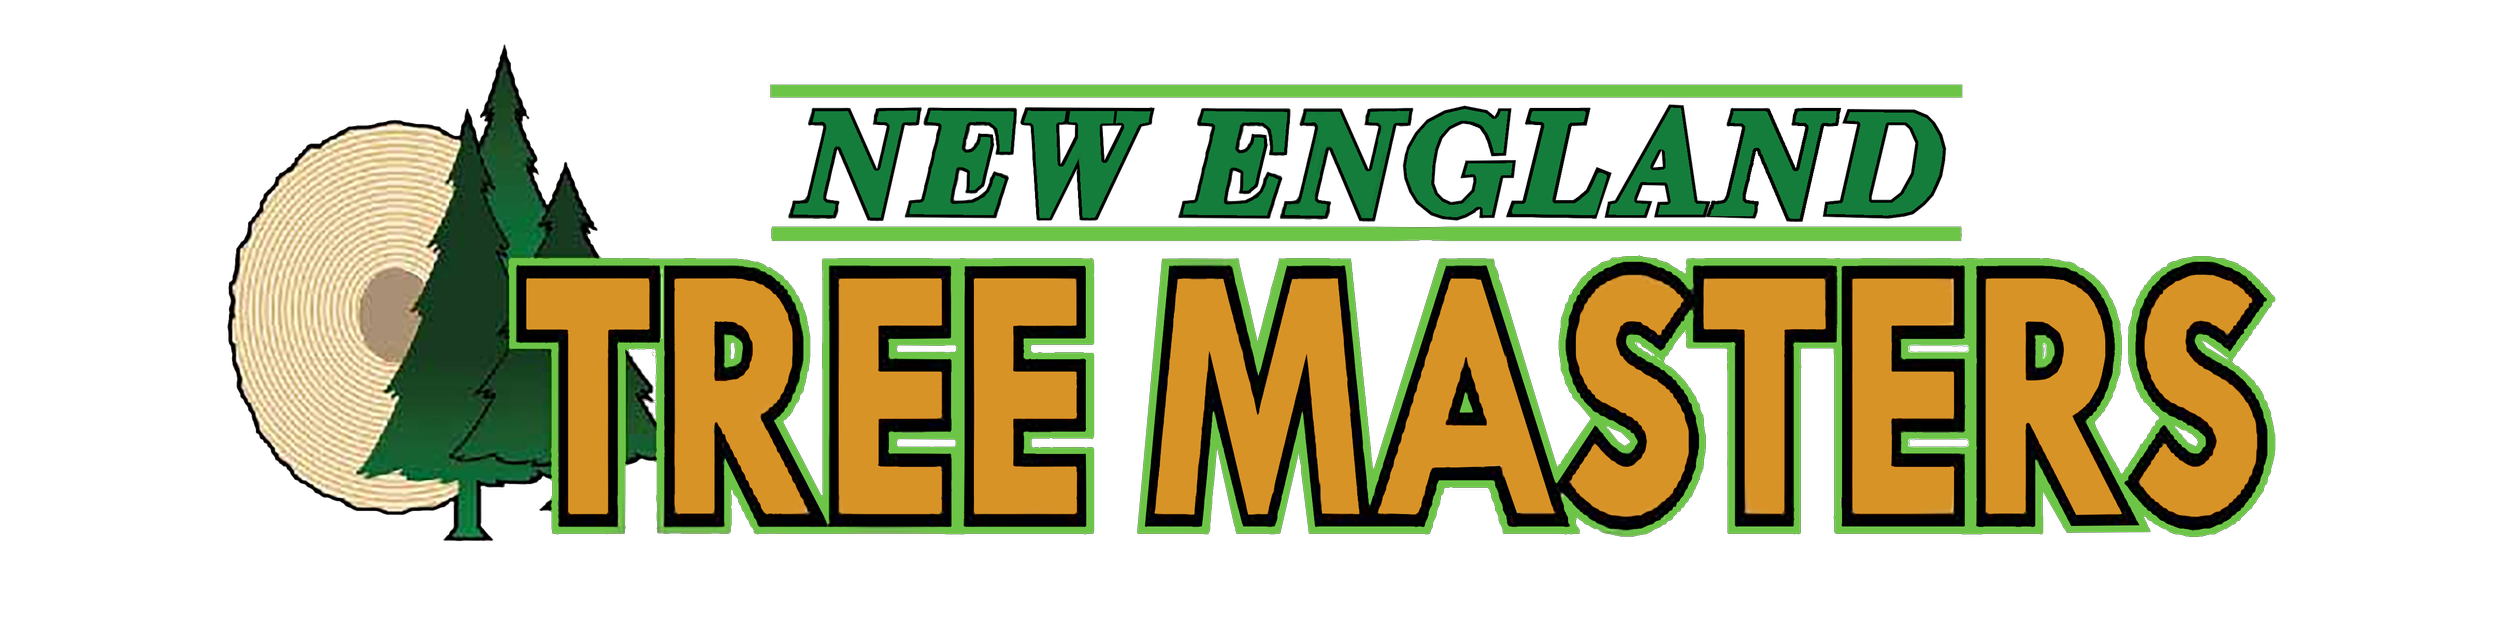 new england tree masters.png